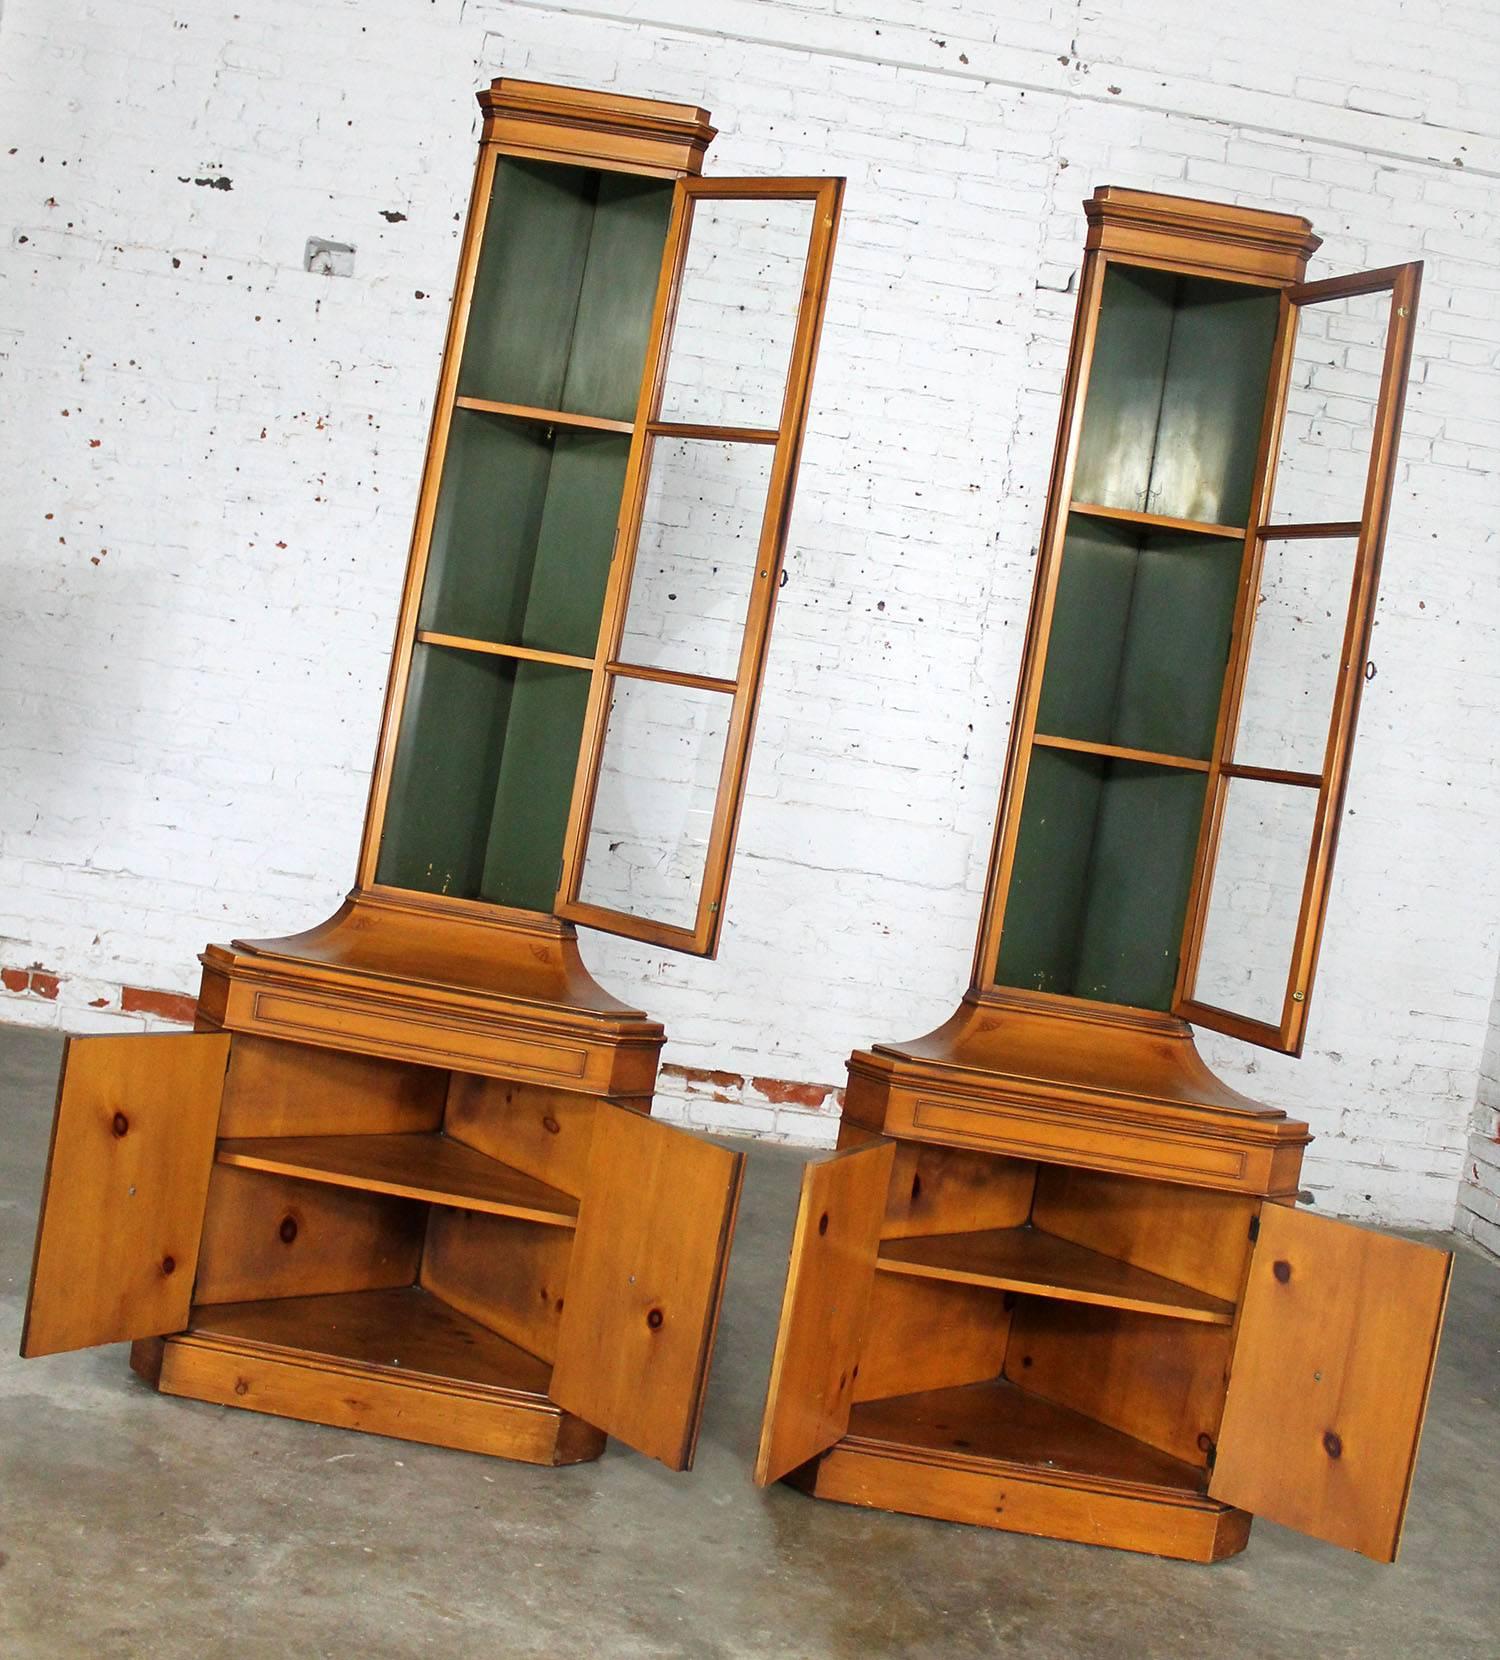 Georgian Knotty Pine Distressed Corner Cabinets Pair by Weiman Heirloom Quality Tables